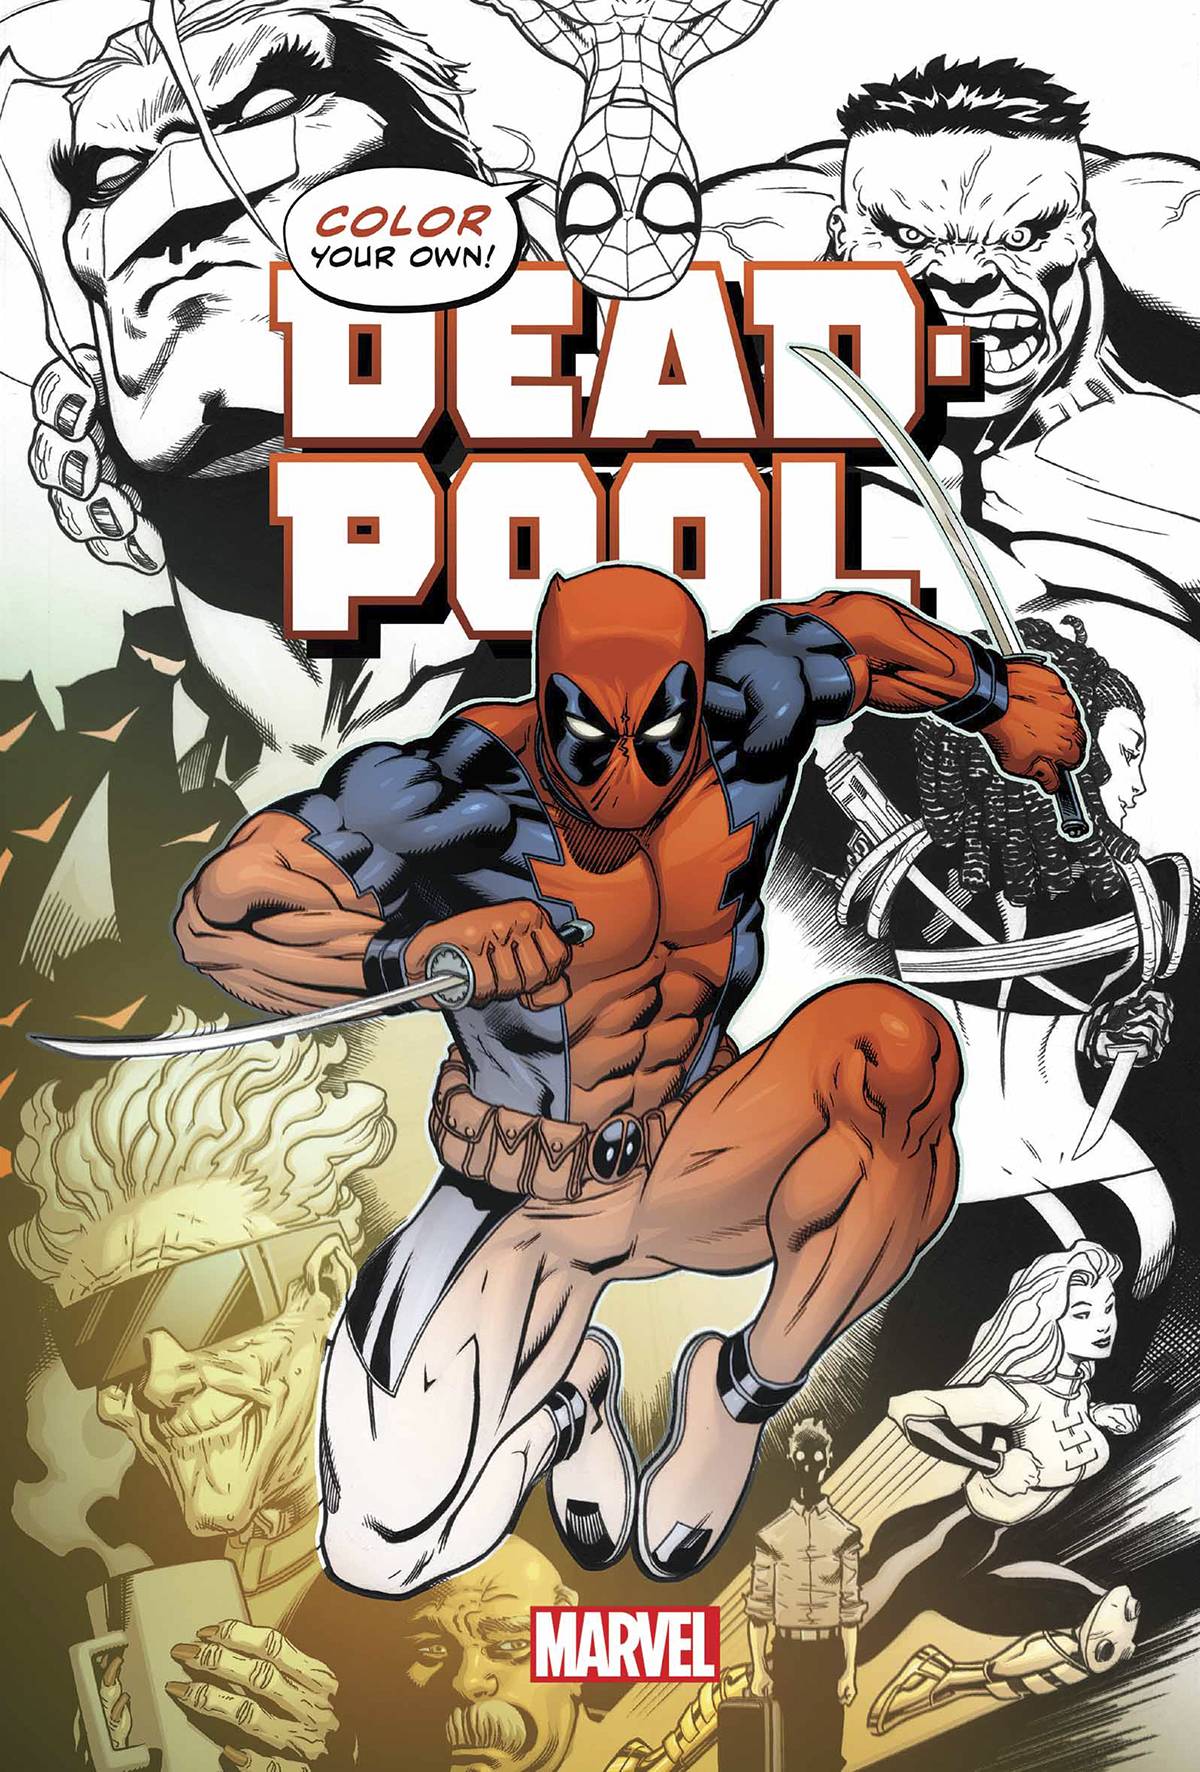 FREE DEADPOOL CLASSIC VOL 01 & COLOR YOUR OWN DEADPOOL TRADE PAPERBACKS w/ $30 PURCHASE (CODE: DEADPOOL)